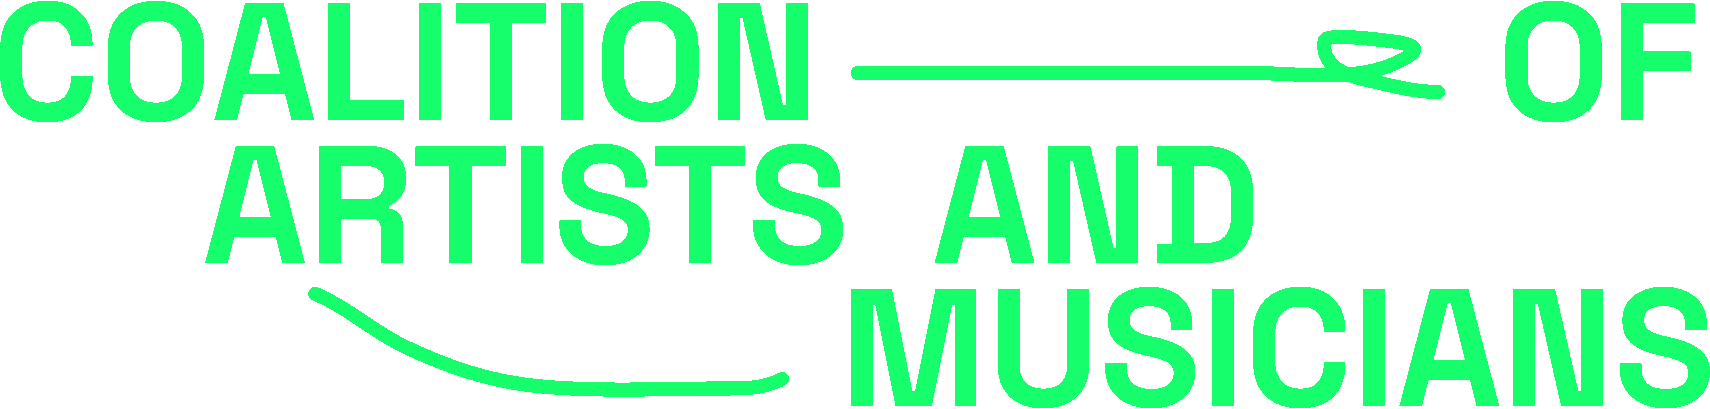 Coalition of Artists and Musicians